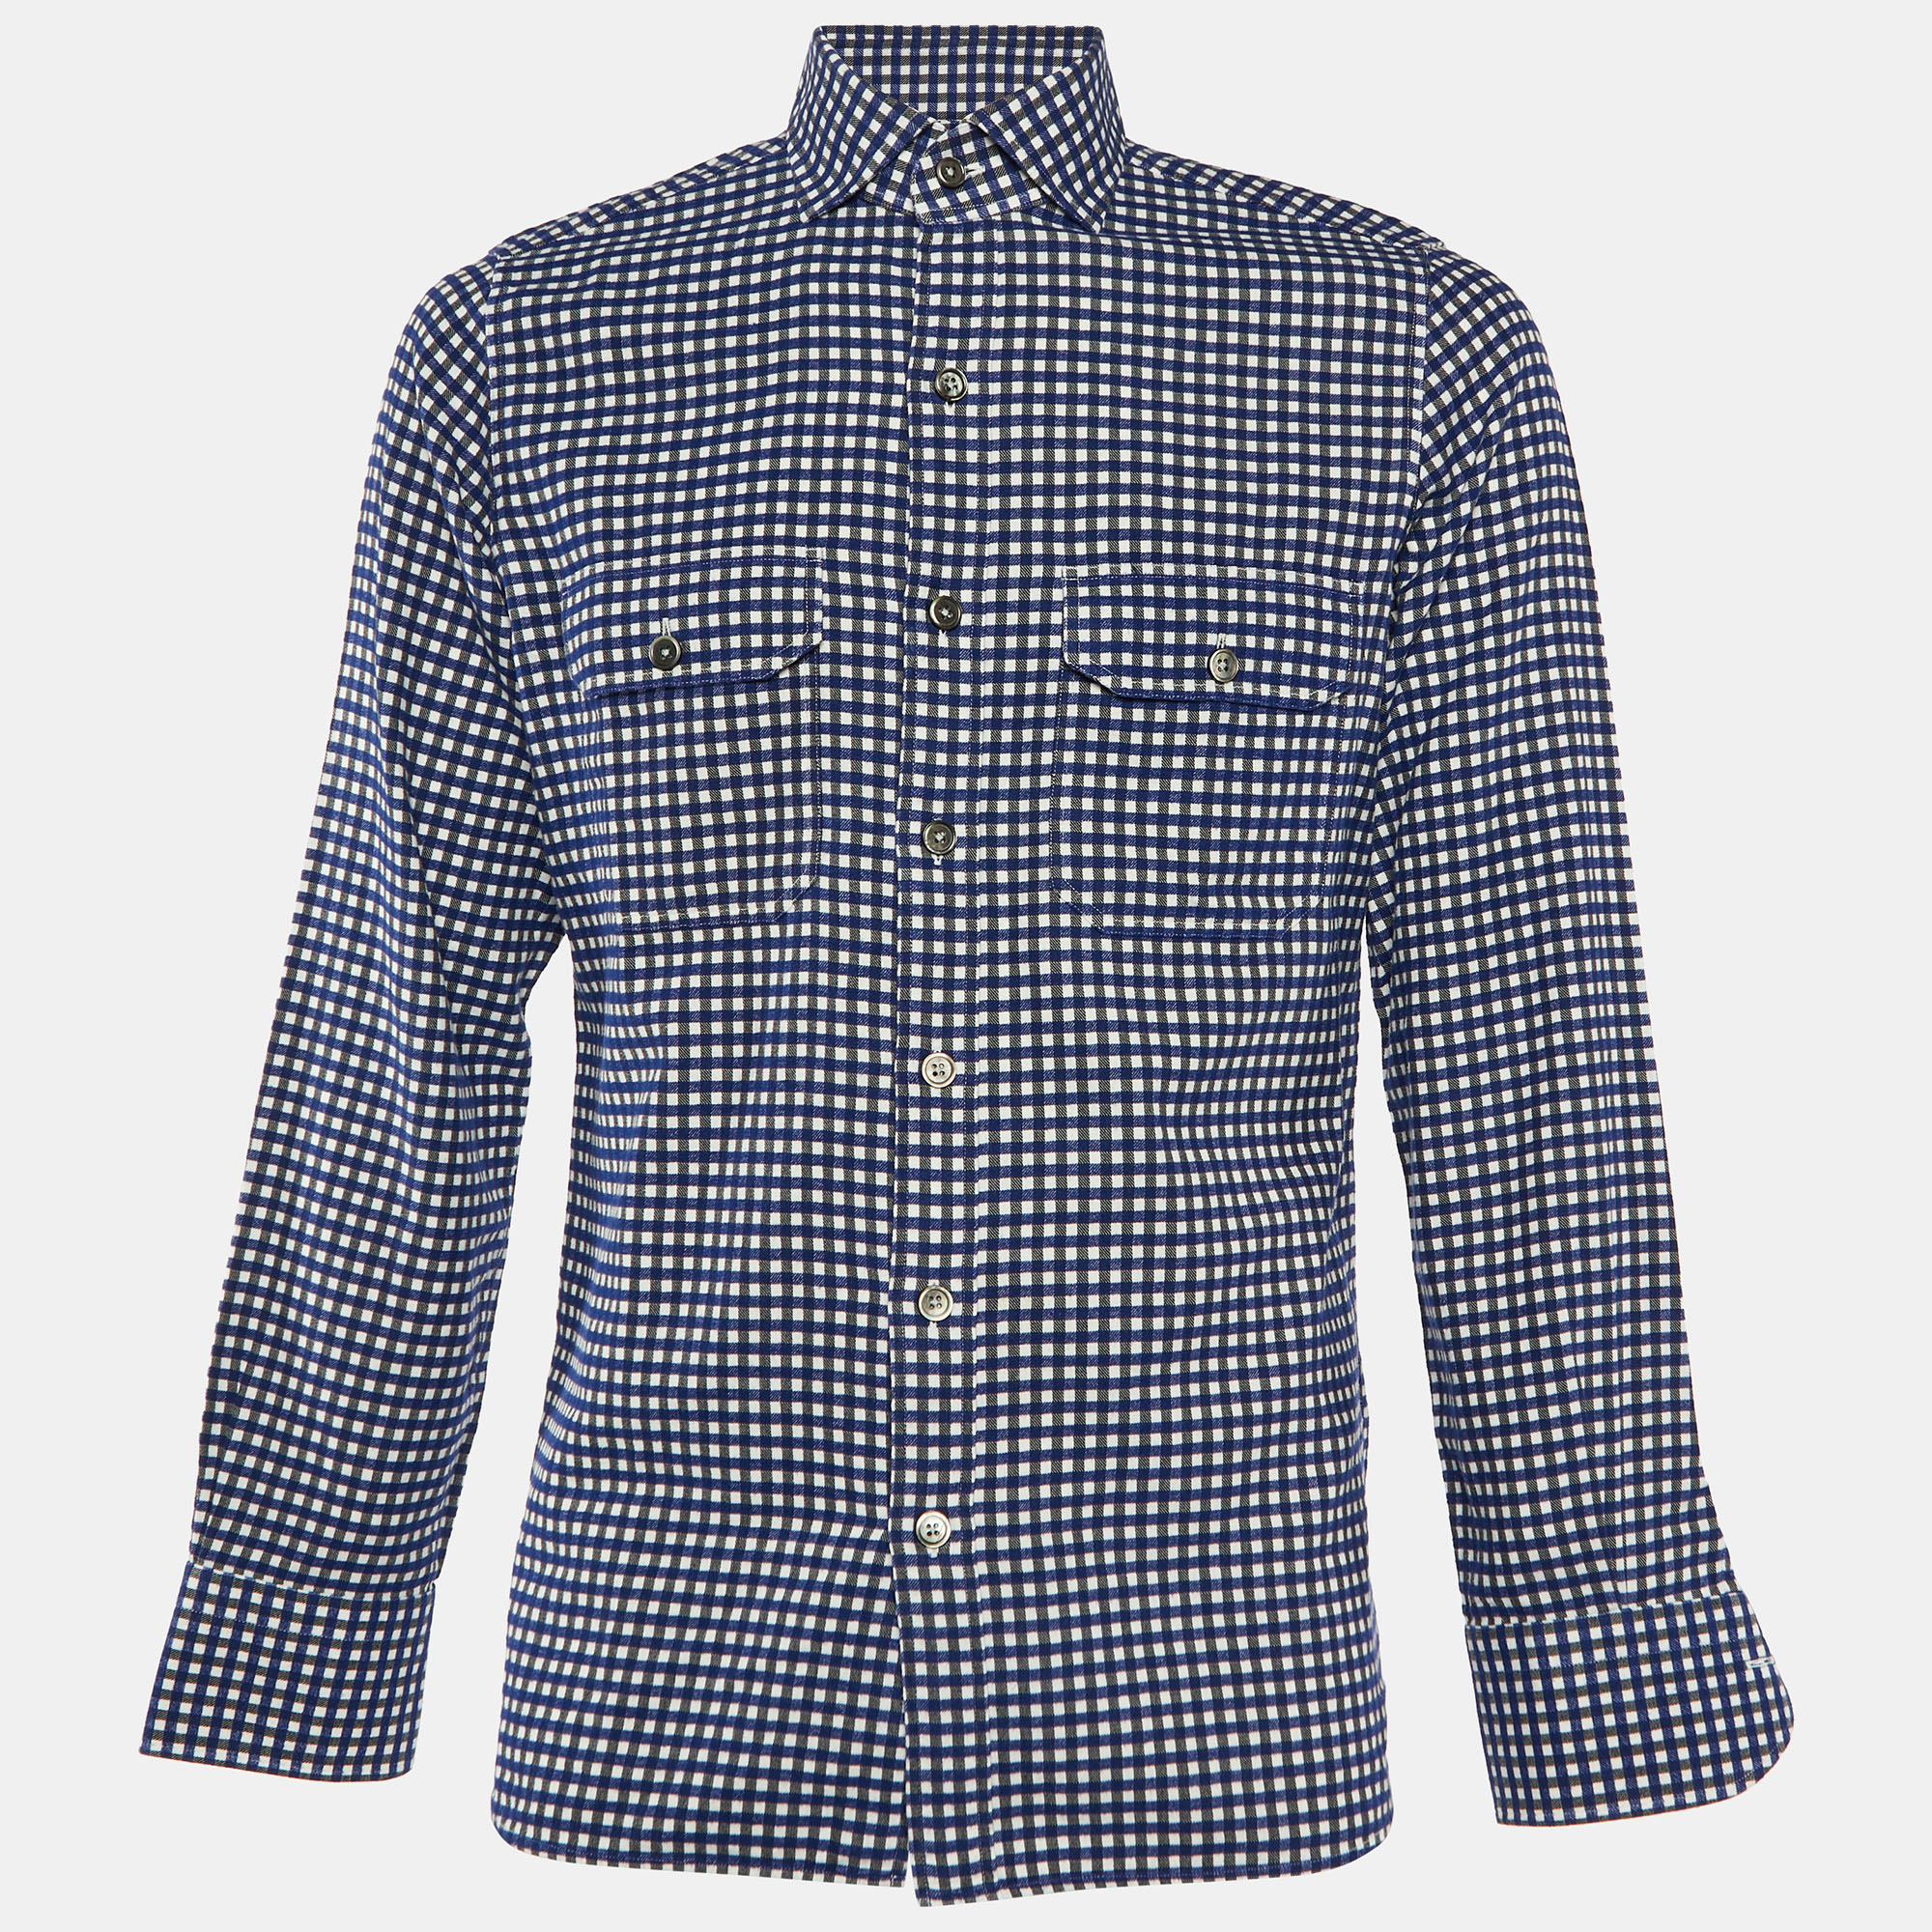 Tom ford navy blue checkered cotton button front shirt m